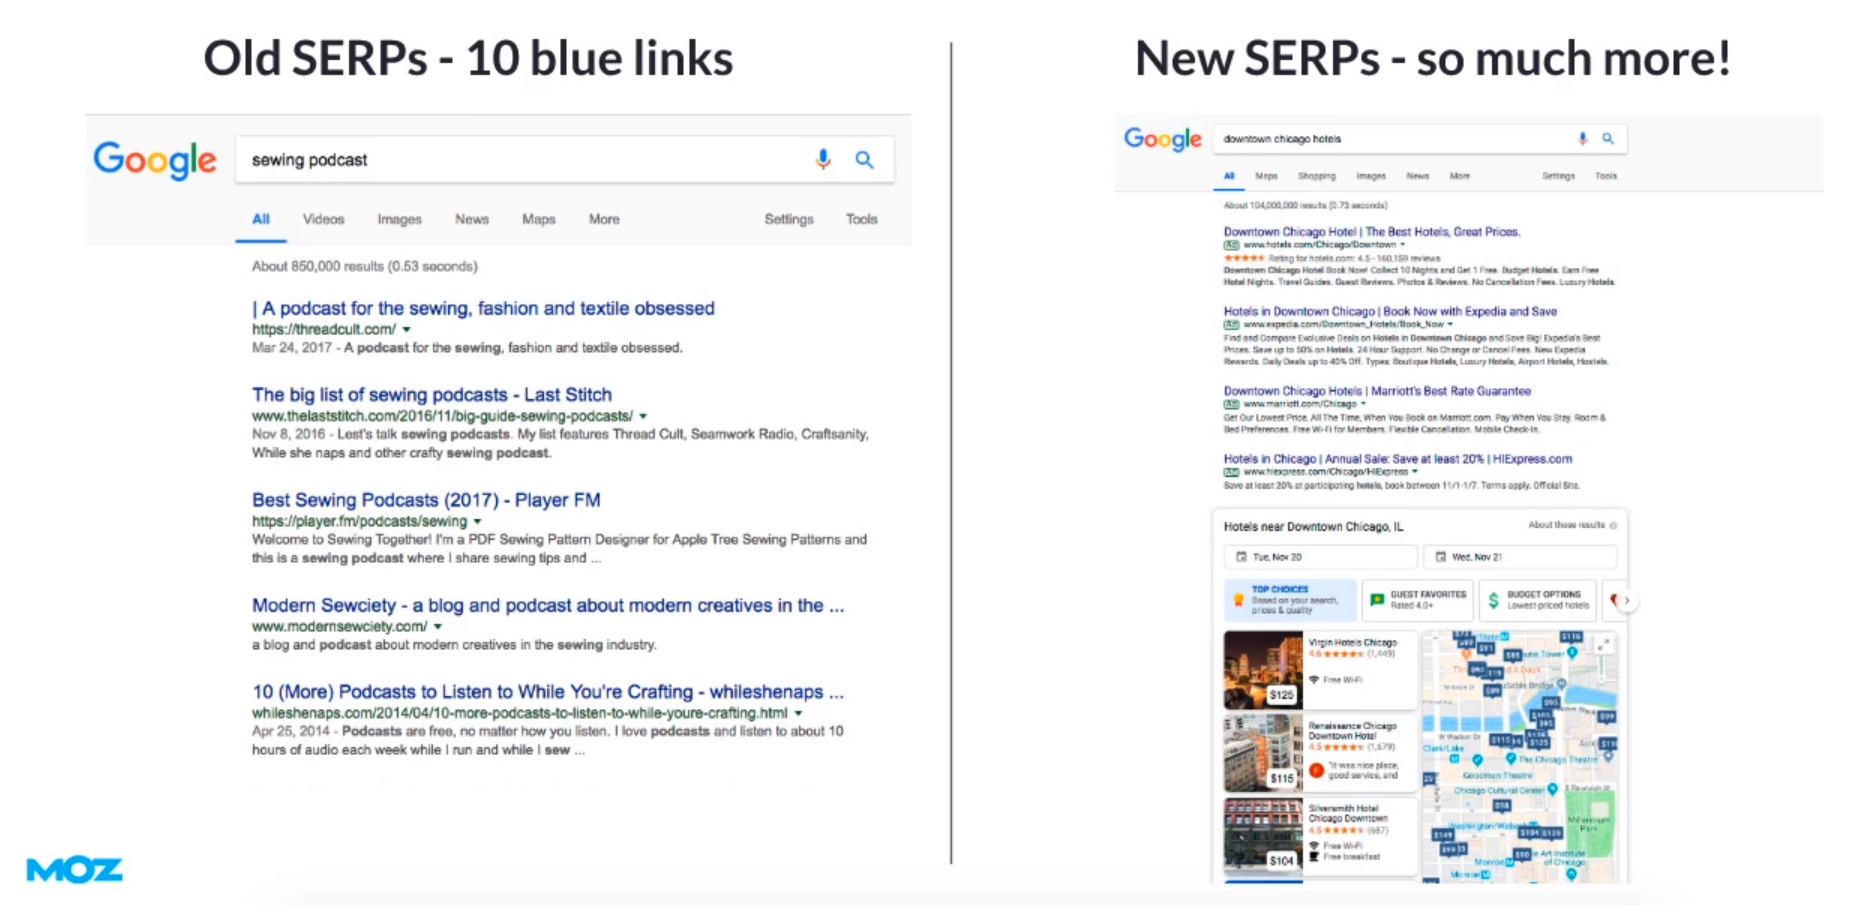 SERP Comparison: Then and Now